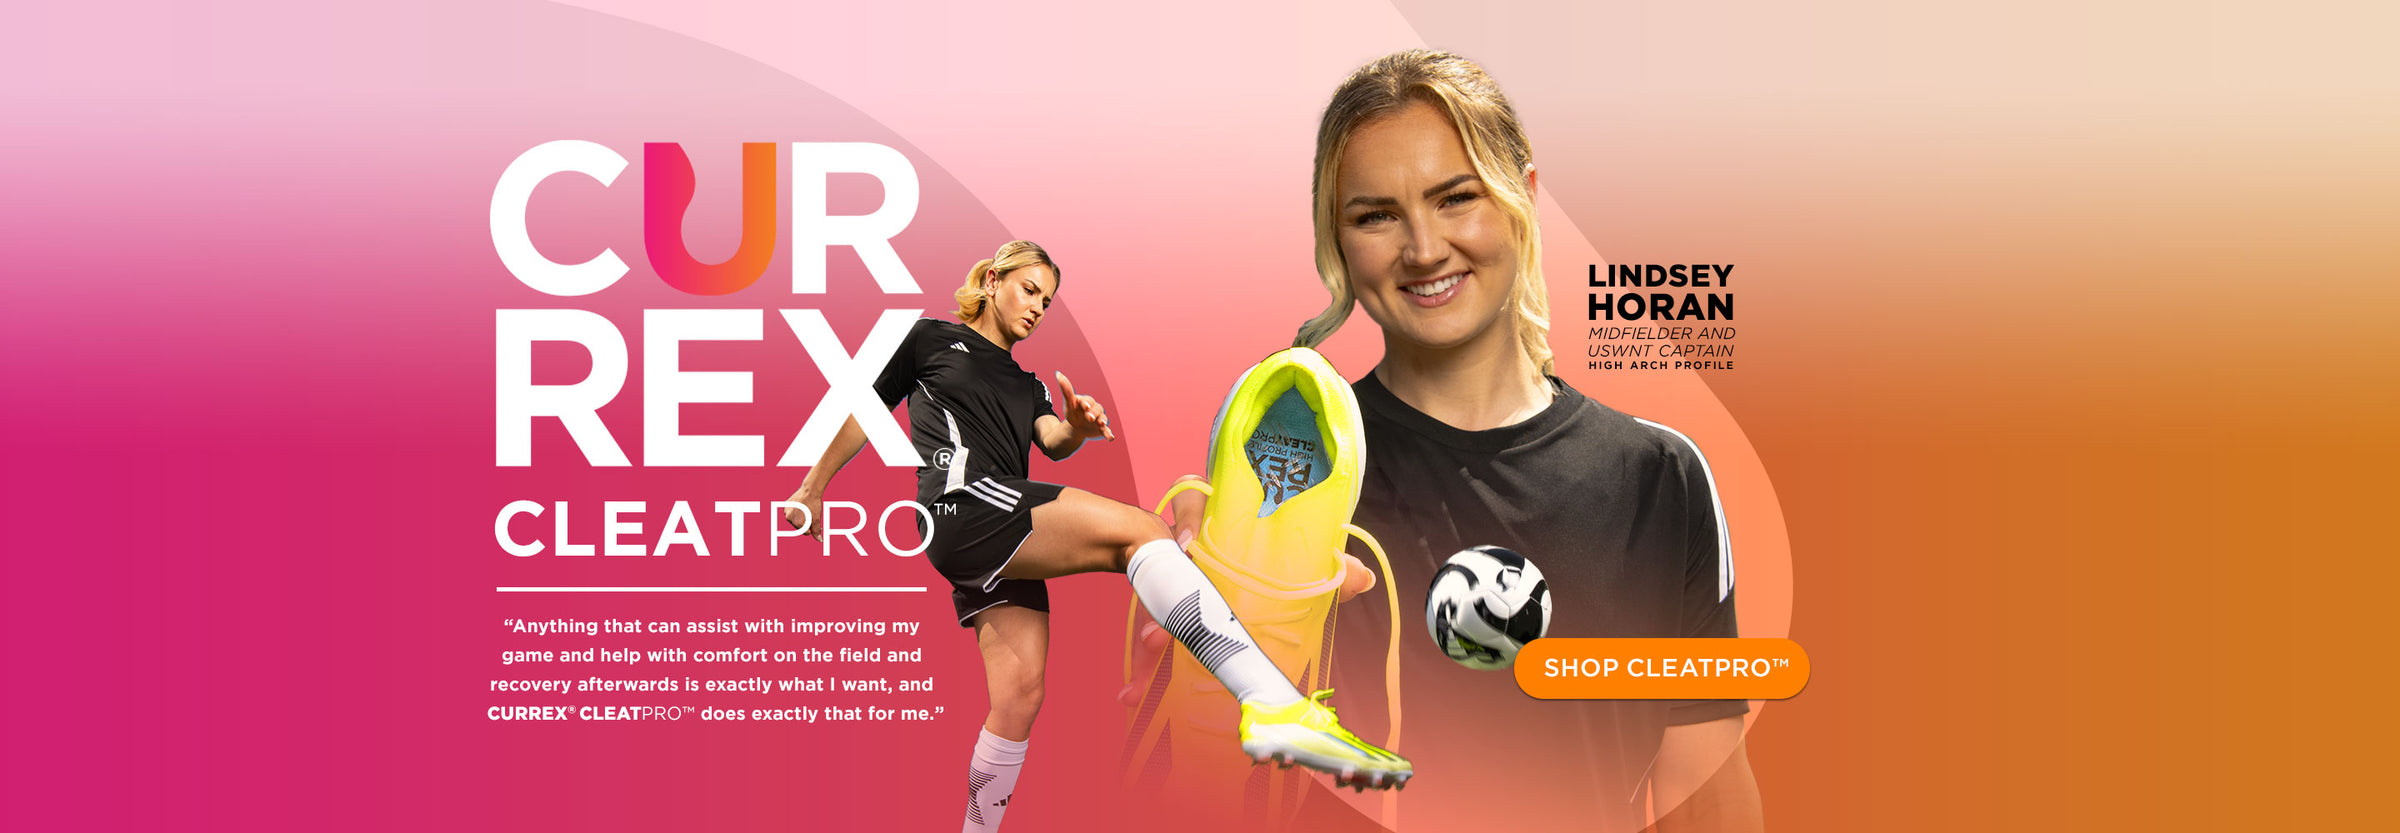 Lindsey Horan: Midfielder and USWNT Captain. She uses the High Arch Profile CURREX® CLEATPRO™. "Anything that can assist with improving my game and help with comfort on the field and recovery afterwards is exactly what I want, and CLEATPRO™ does exactly that for me." SHOP CLEATPRO™